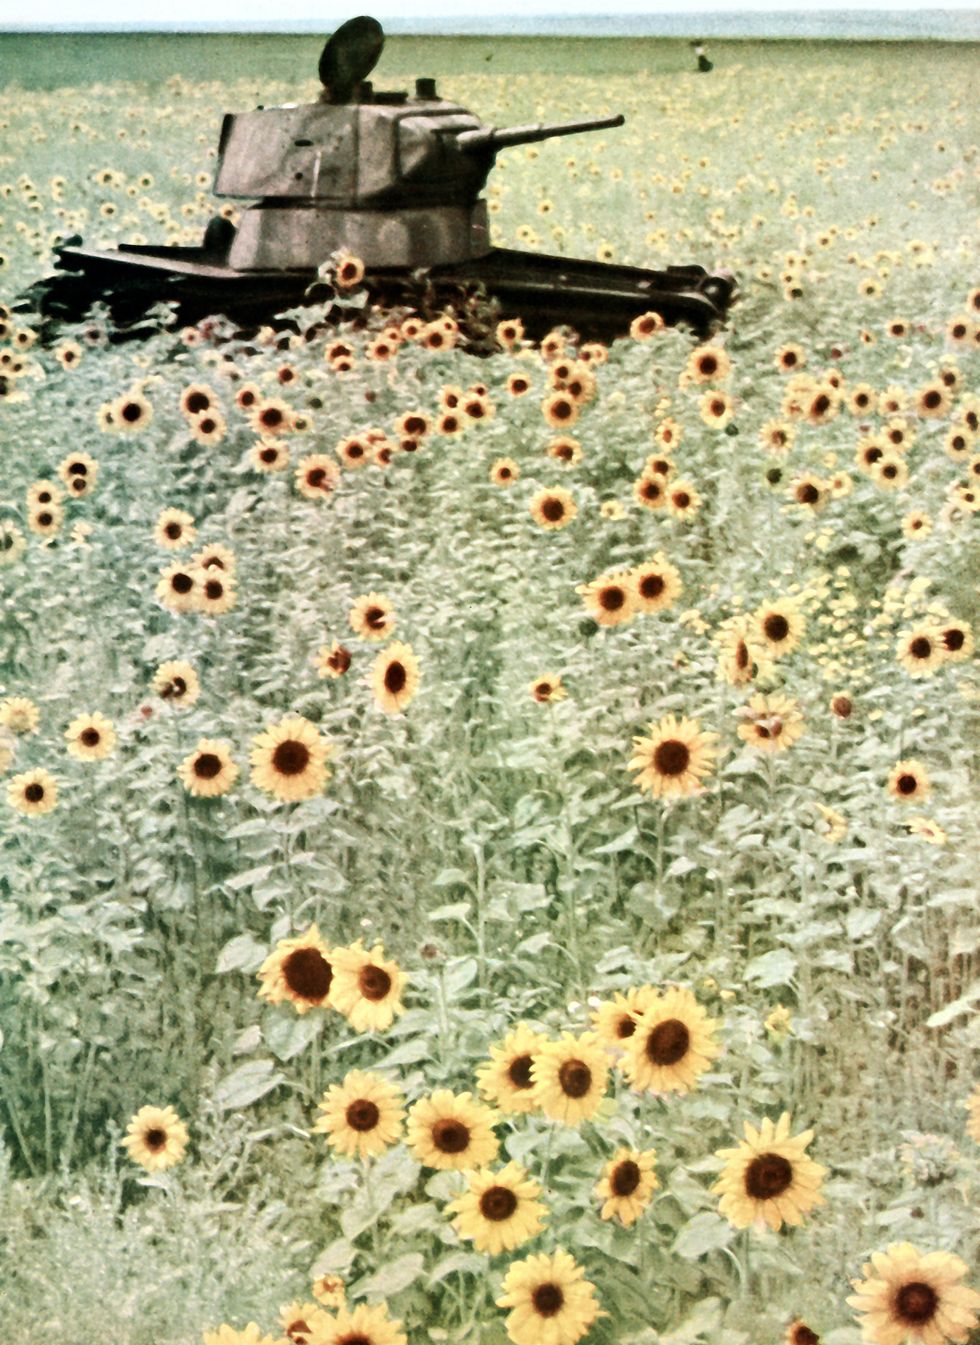 operation barbarossa, a russian t34 tank has been abandoned in a sunflower field 1942 it was used in the defense of russia against the german led invasion on the eastern front soviet union photo by galerie bilderweltgetty images